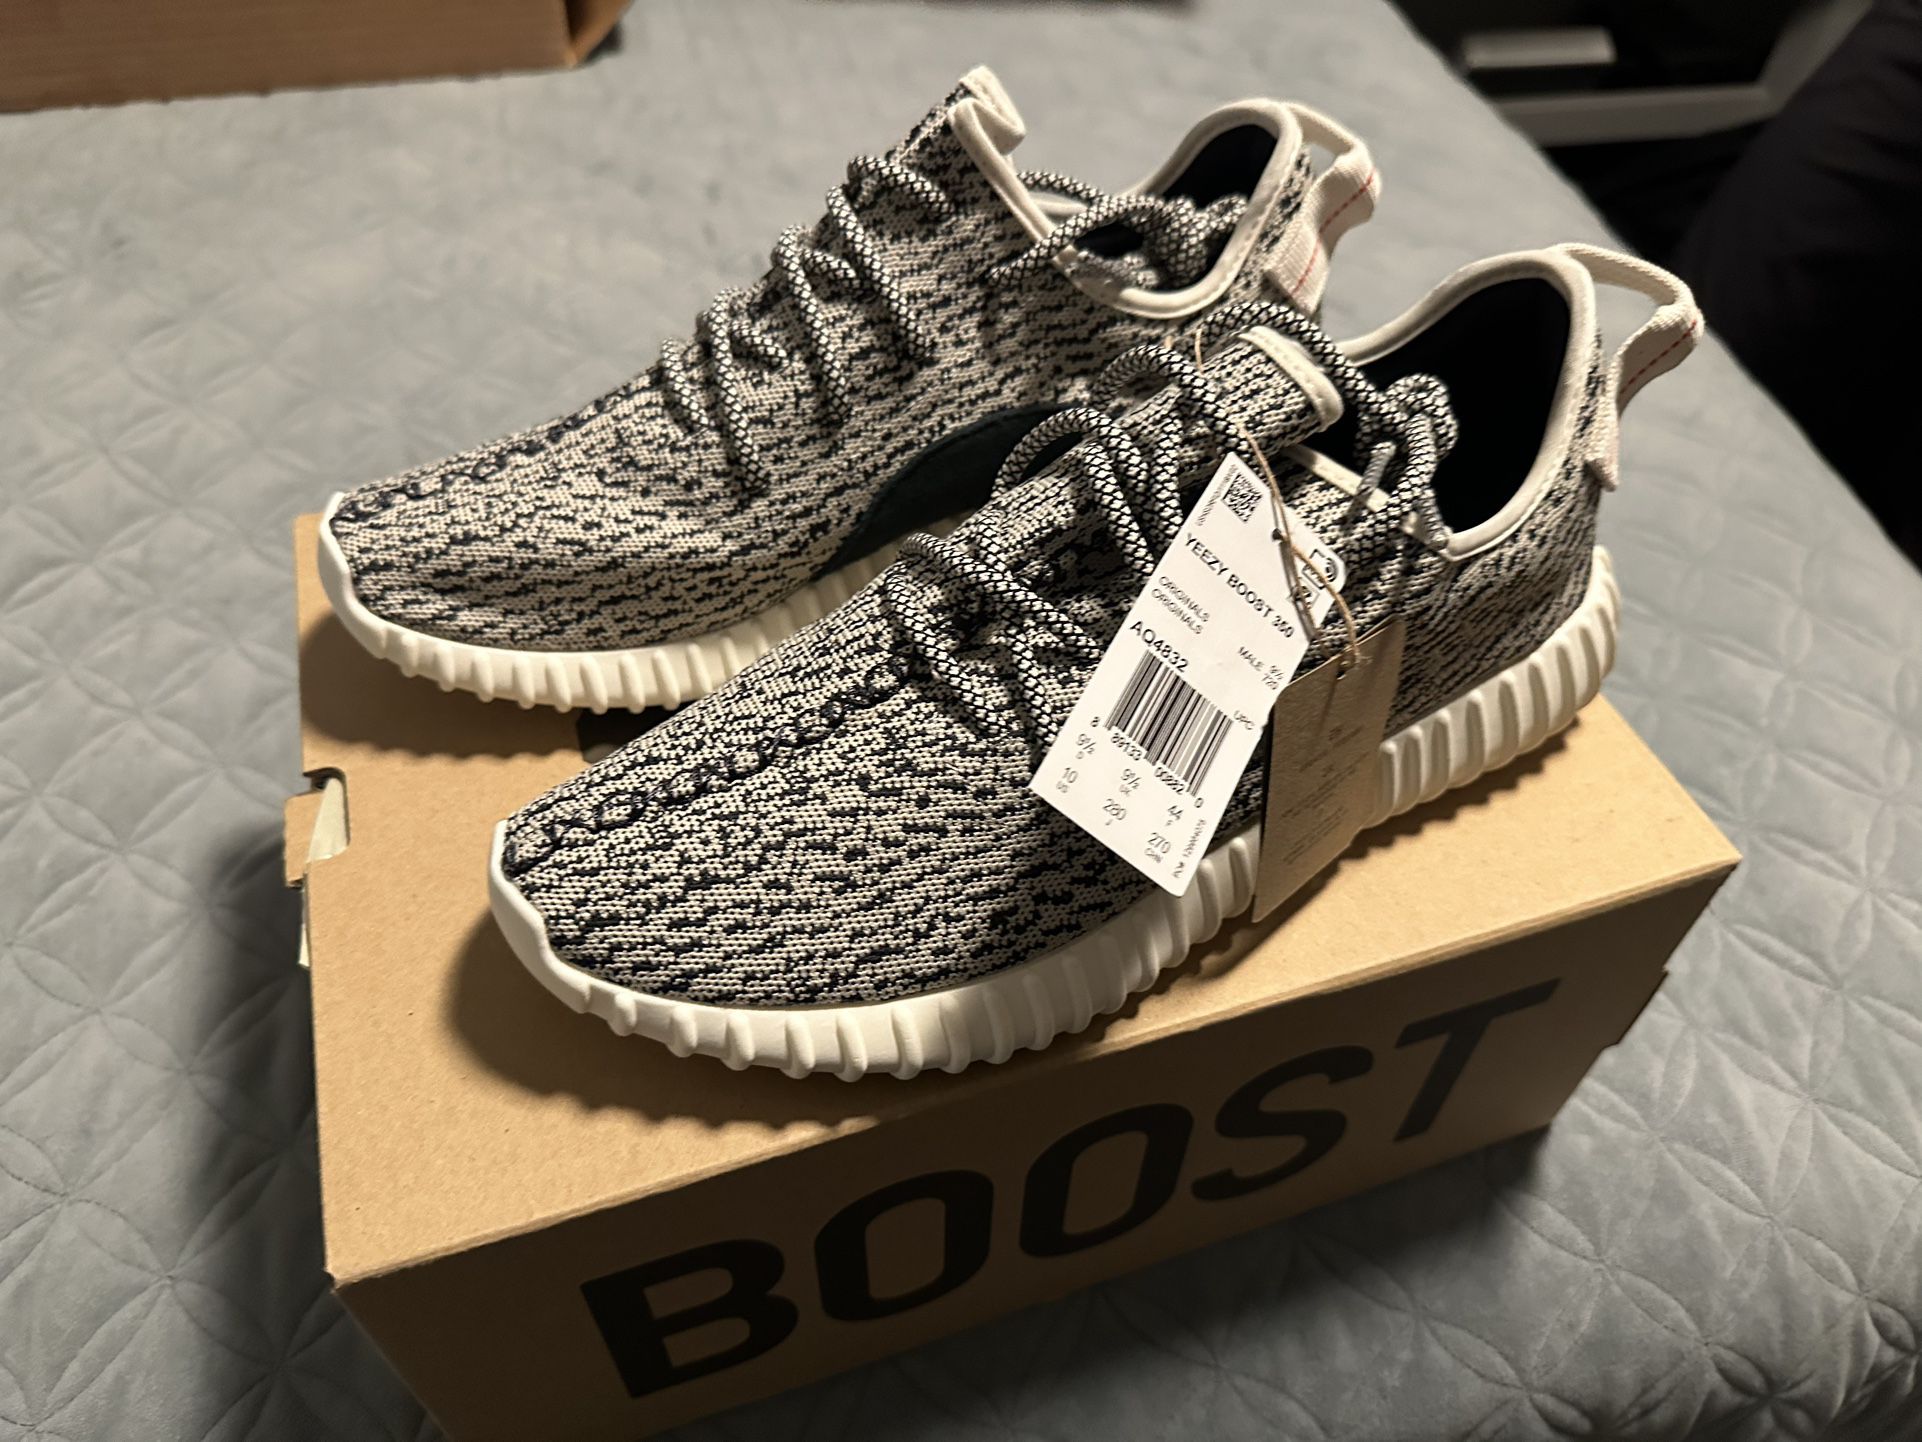 Yeezy Boost 350 TURTLE/BLUGRA/CWHIlE